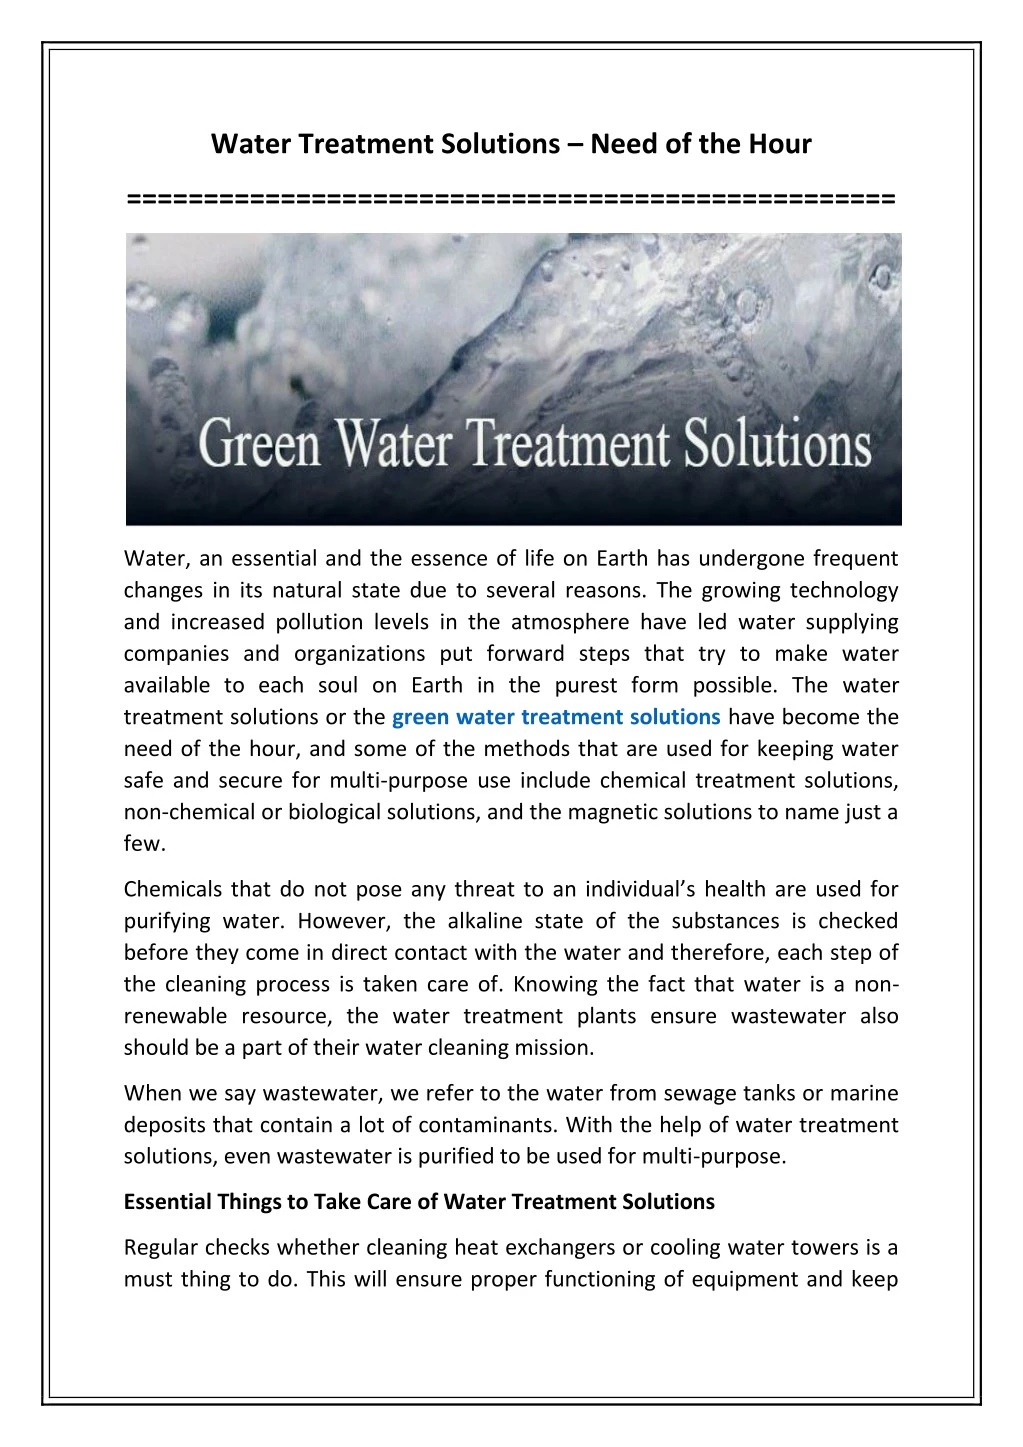 water treatment solutions need of the hour